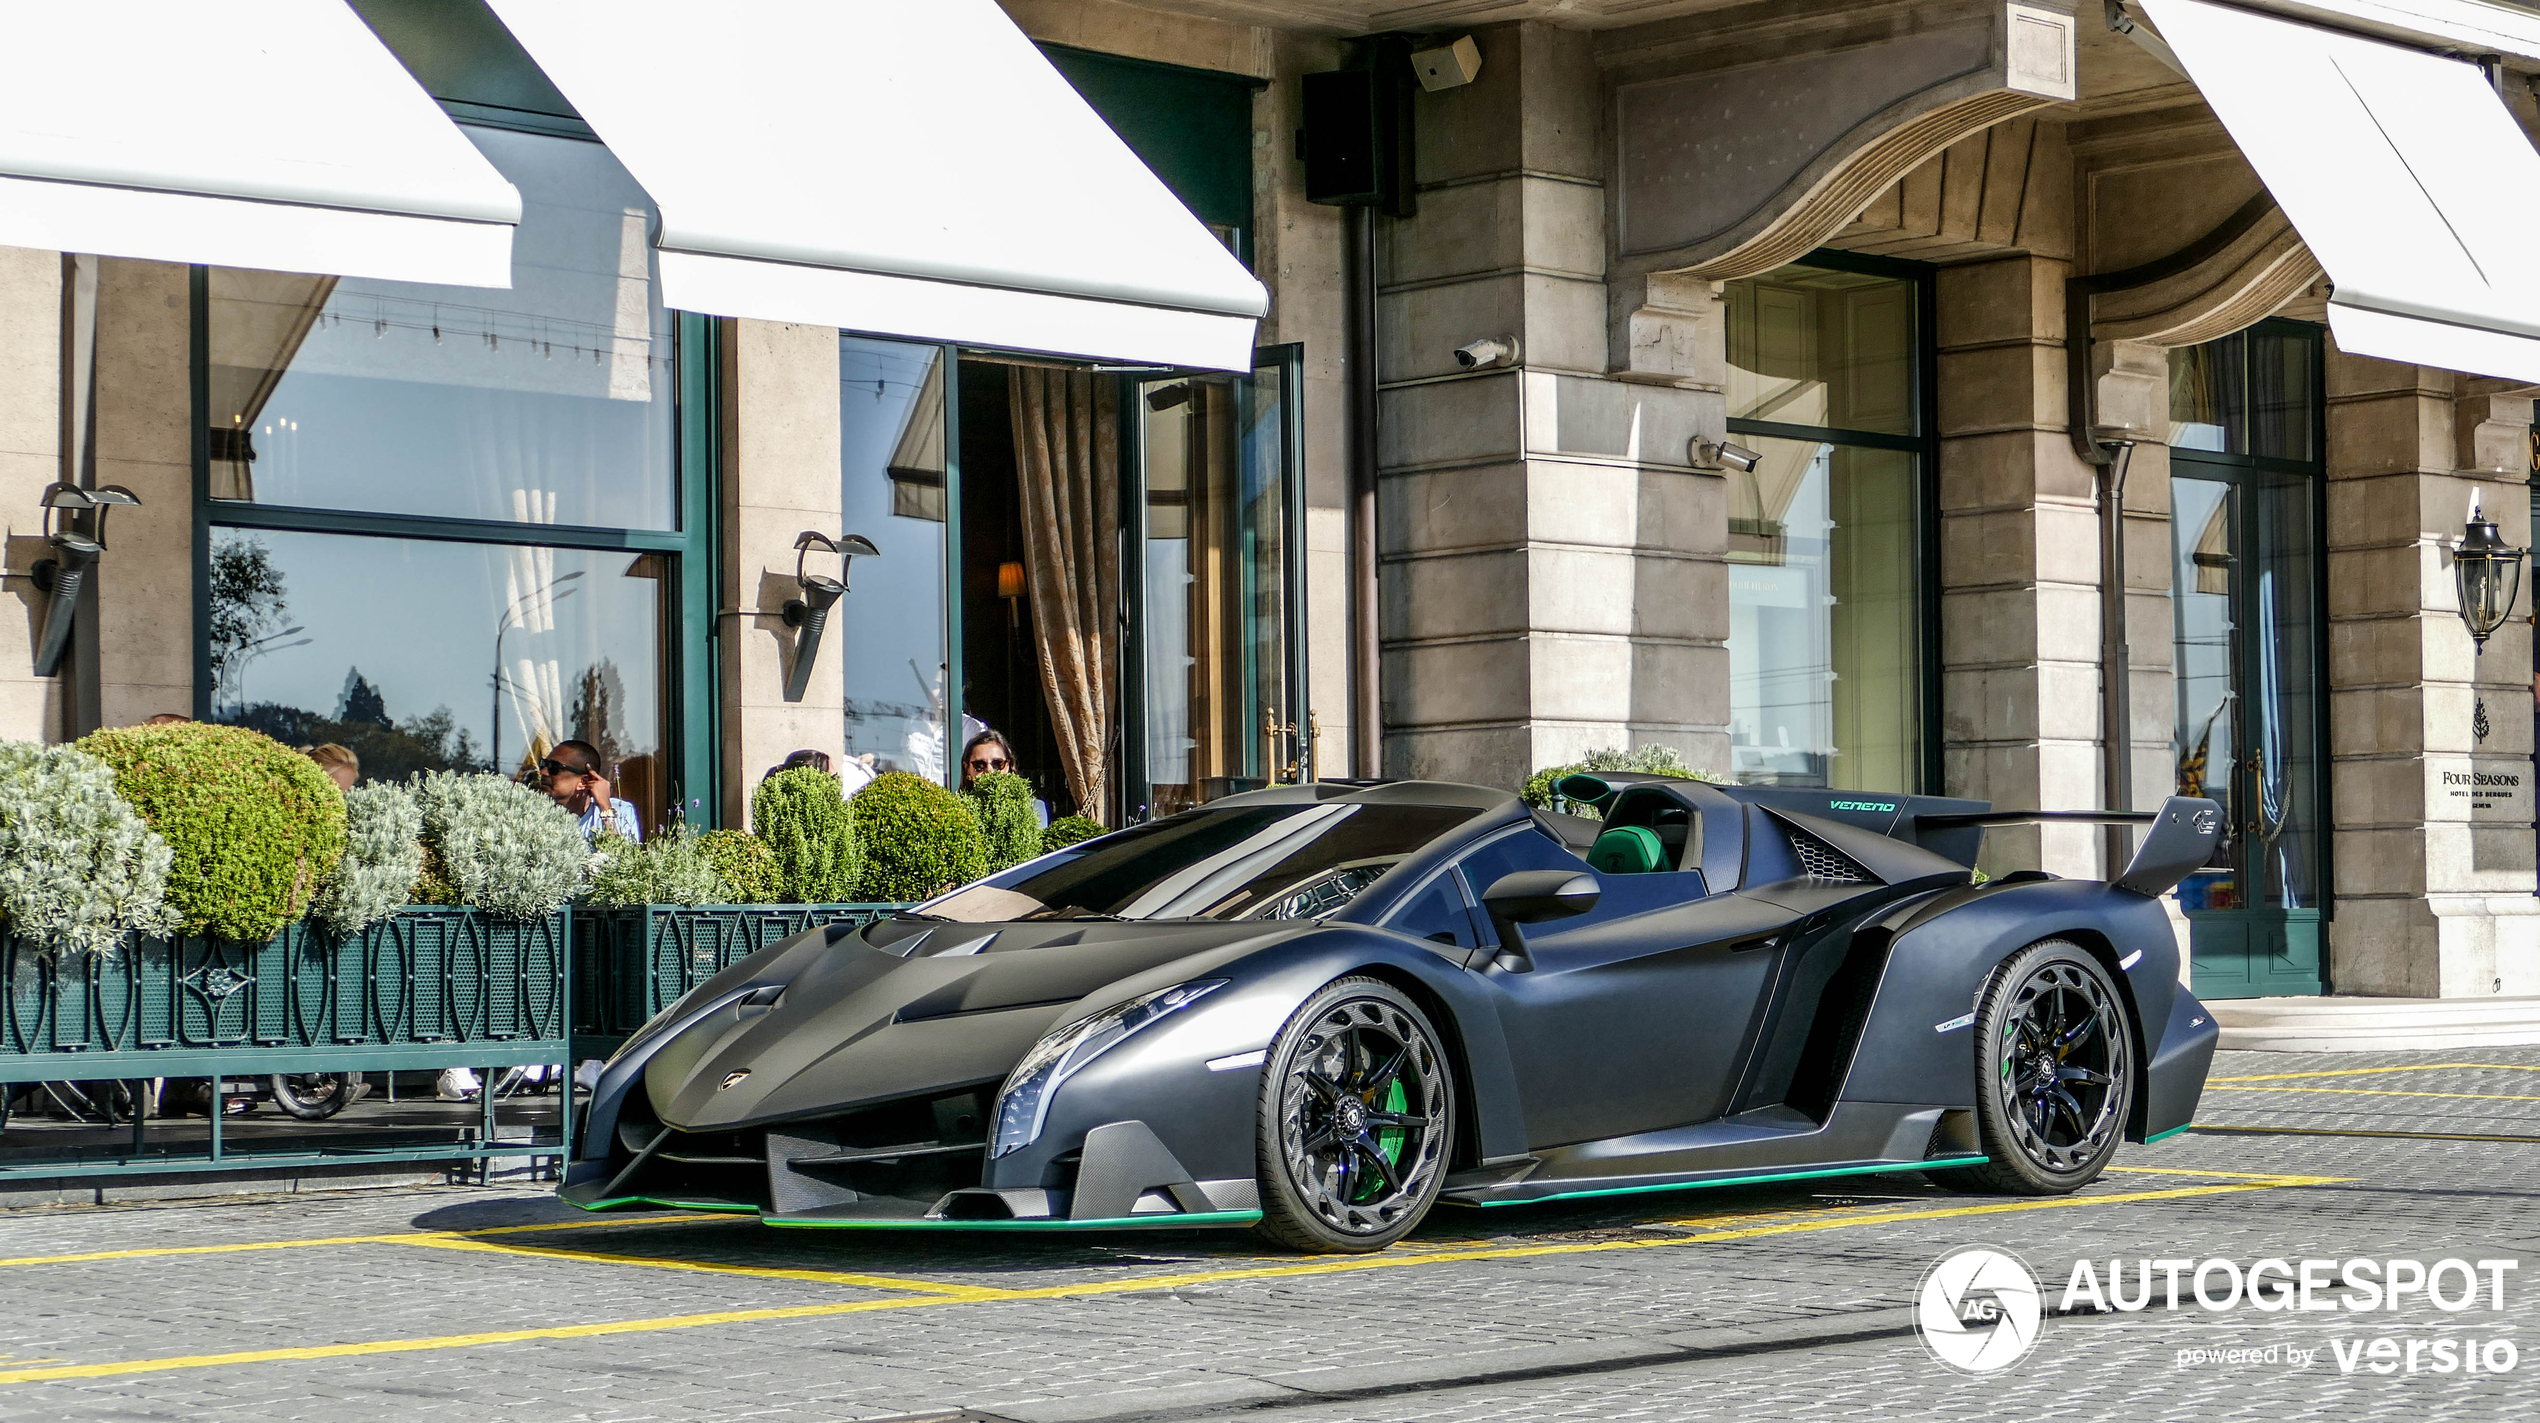 Four years have passed since the appearance of the Veneno in Geneva.